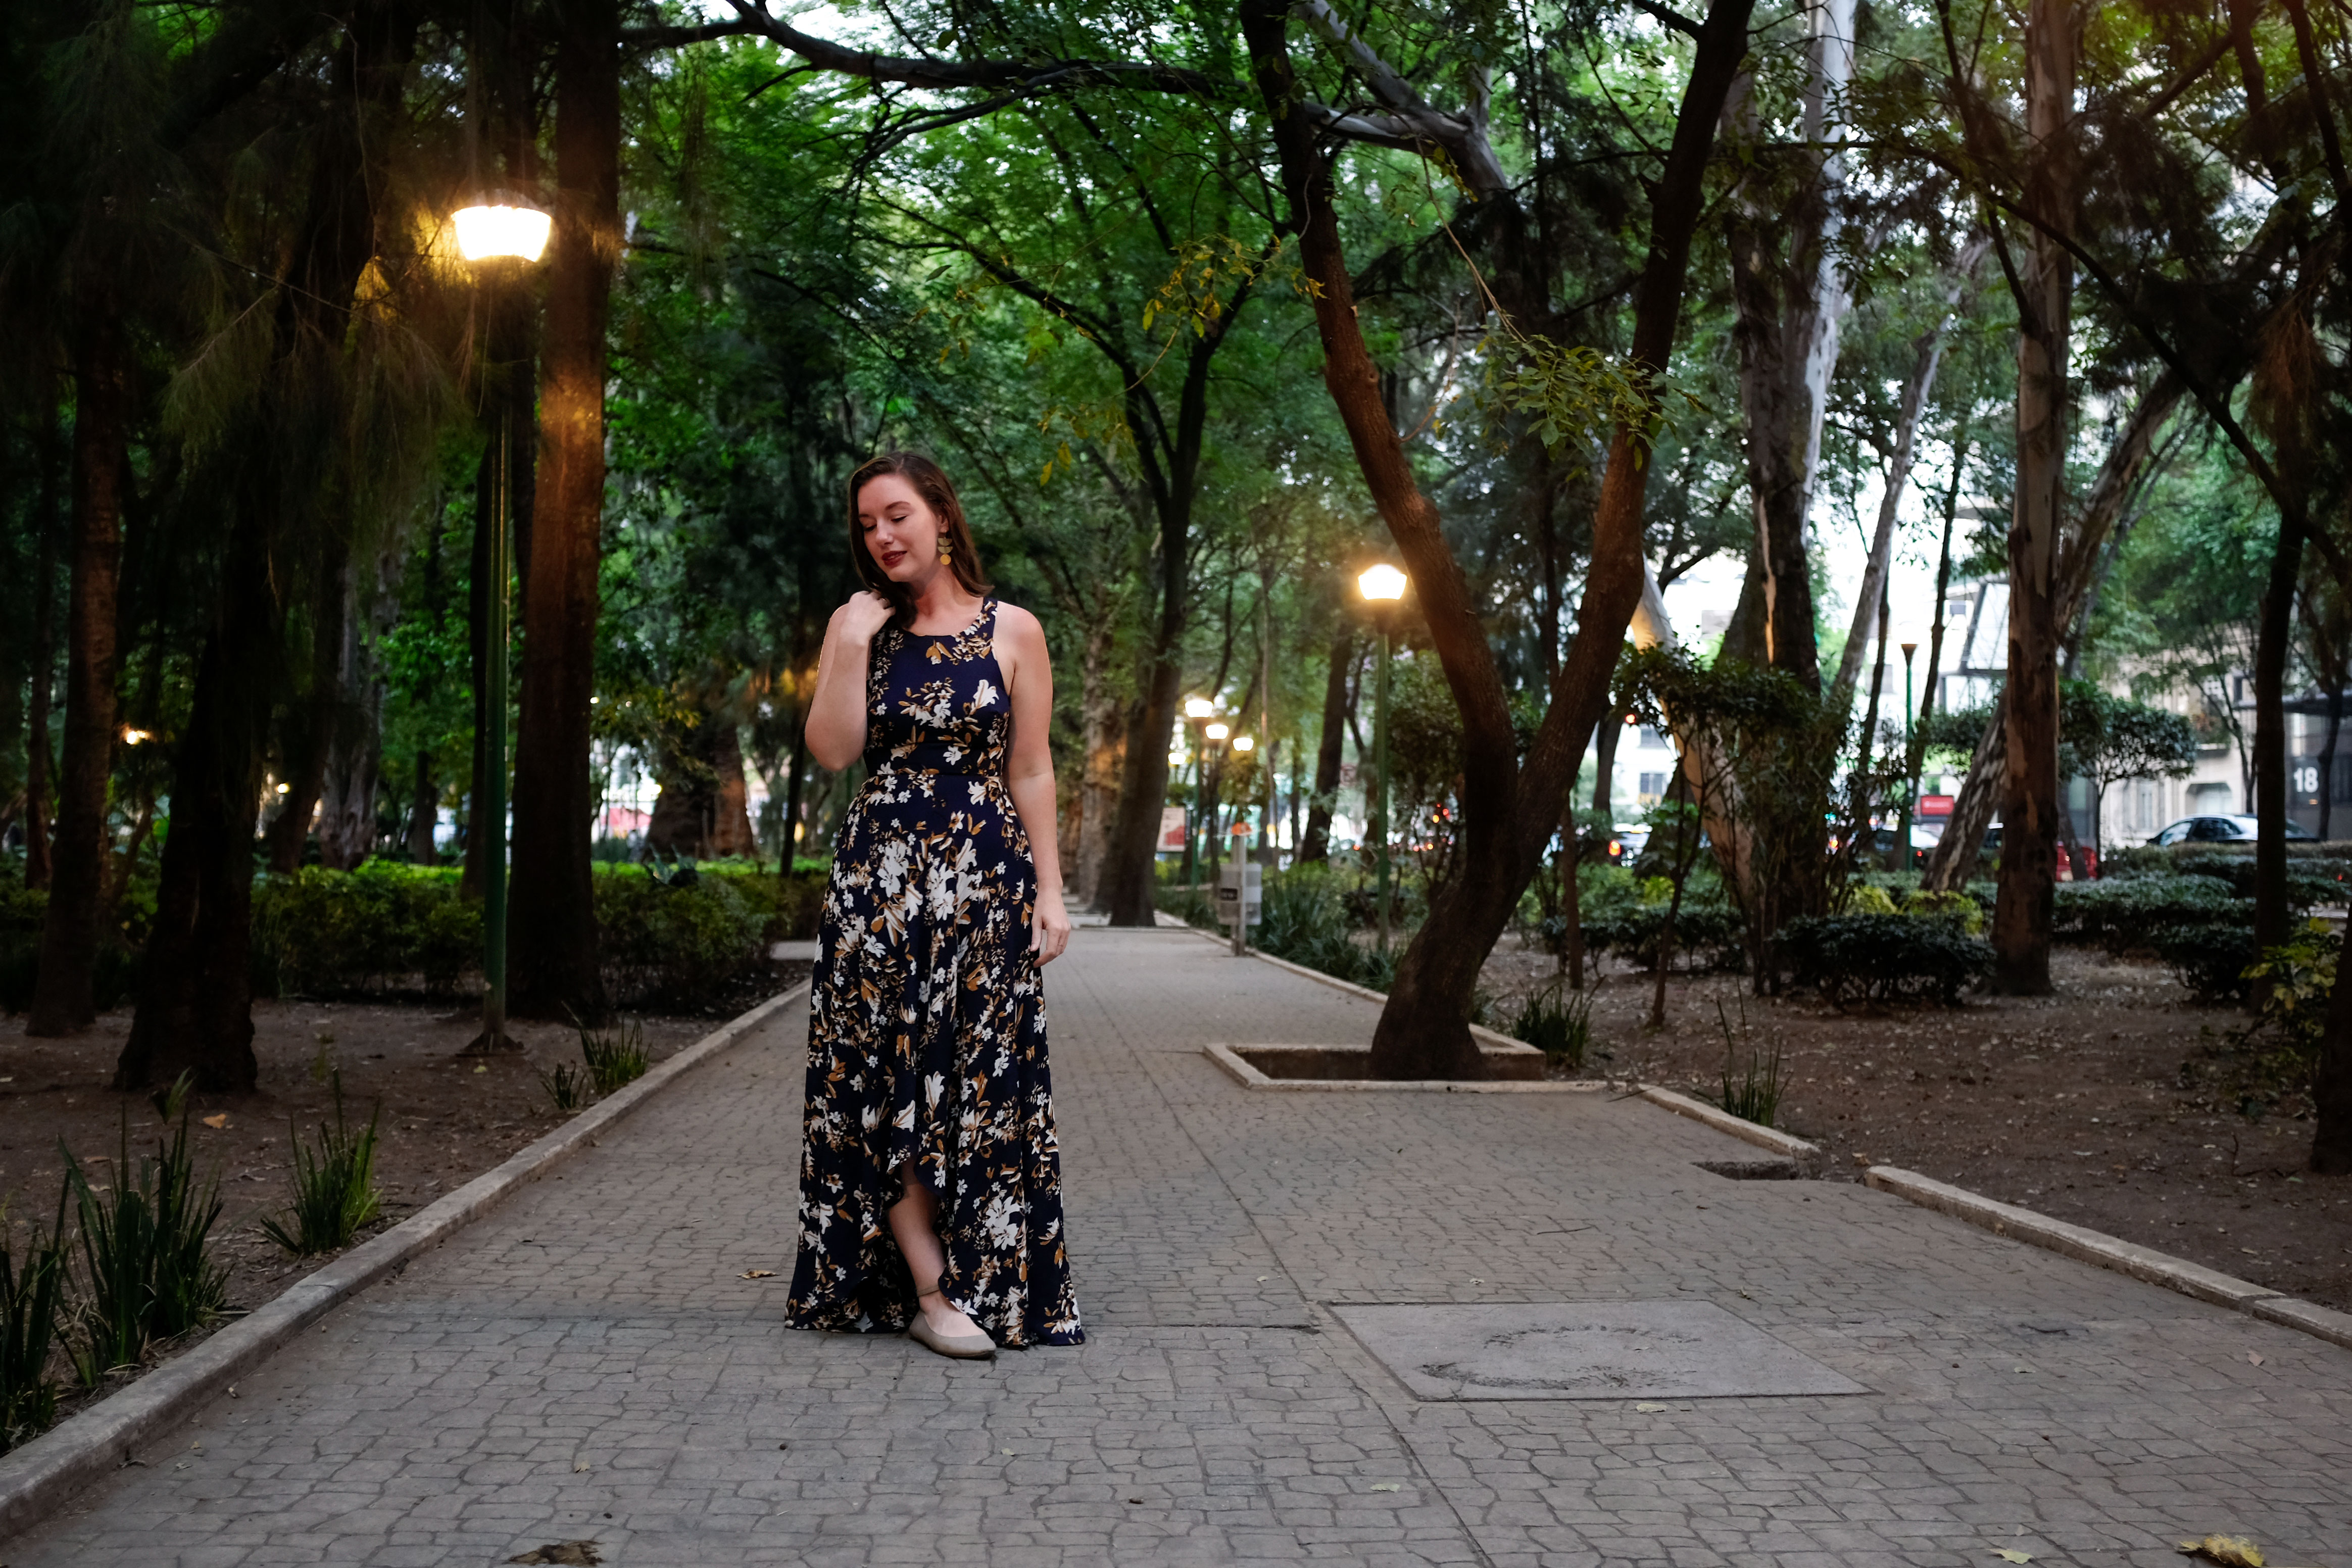 Alyssa in Parque Espana in a long floral dress and neutral shoes